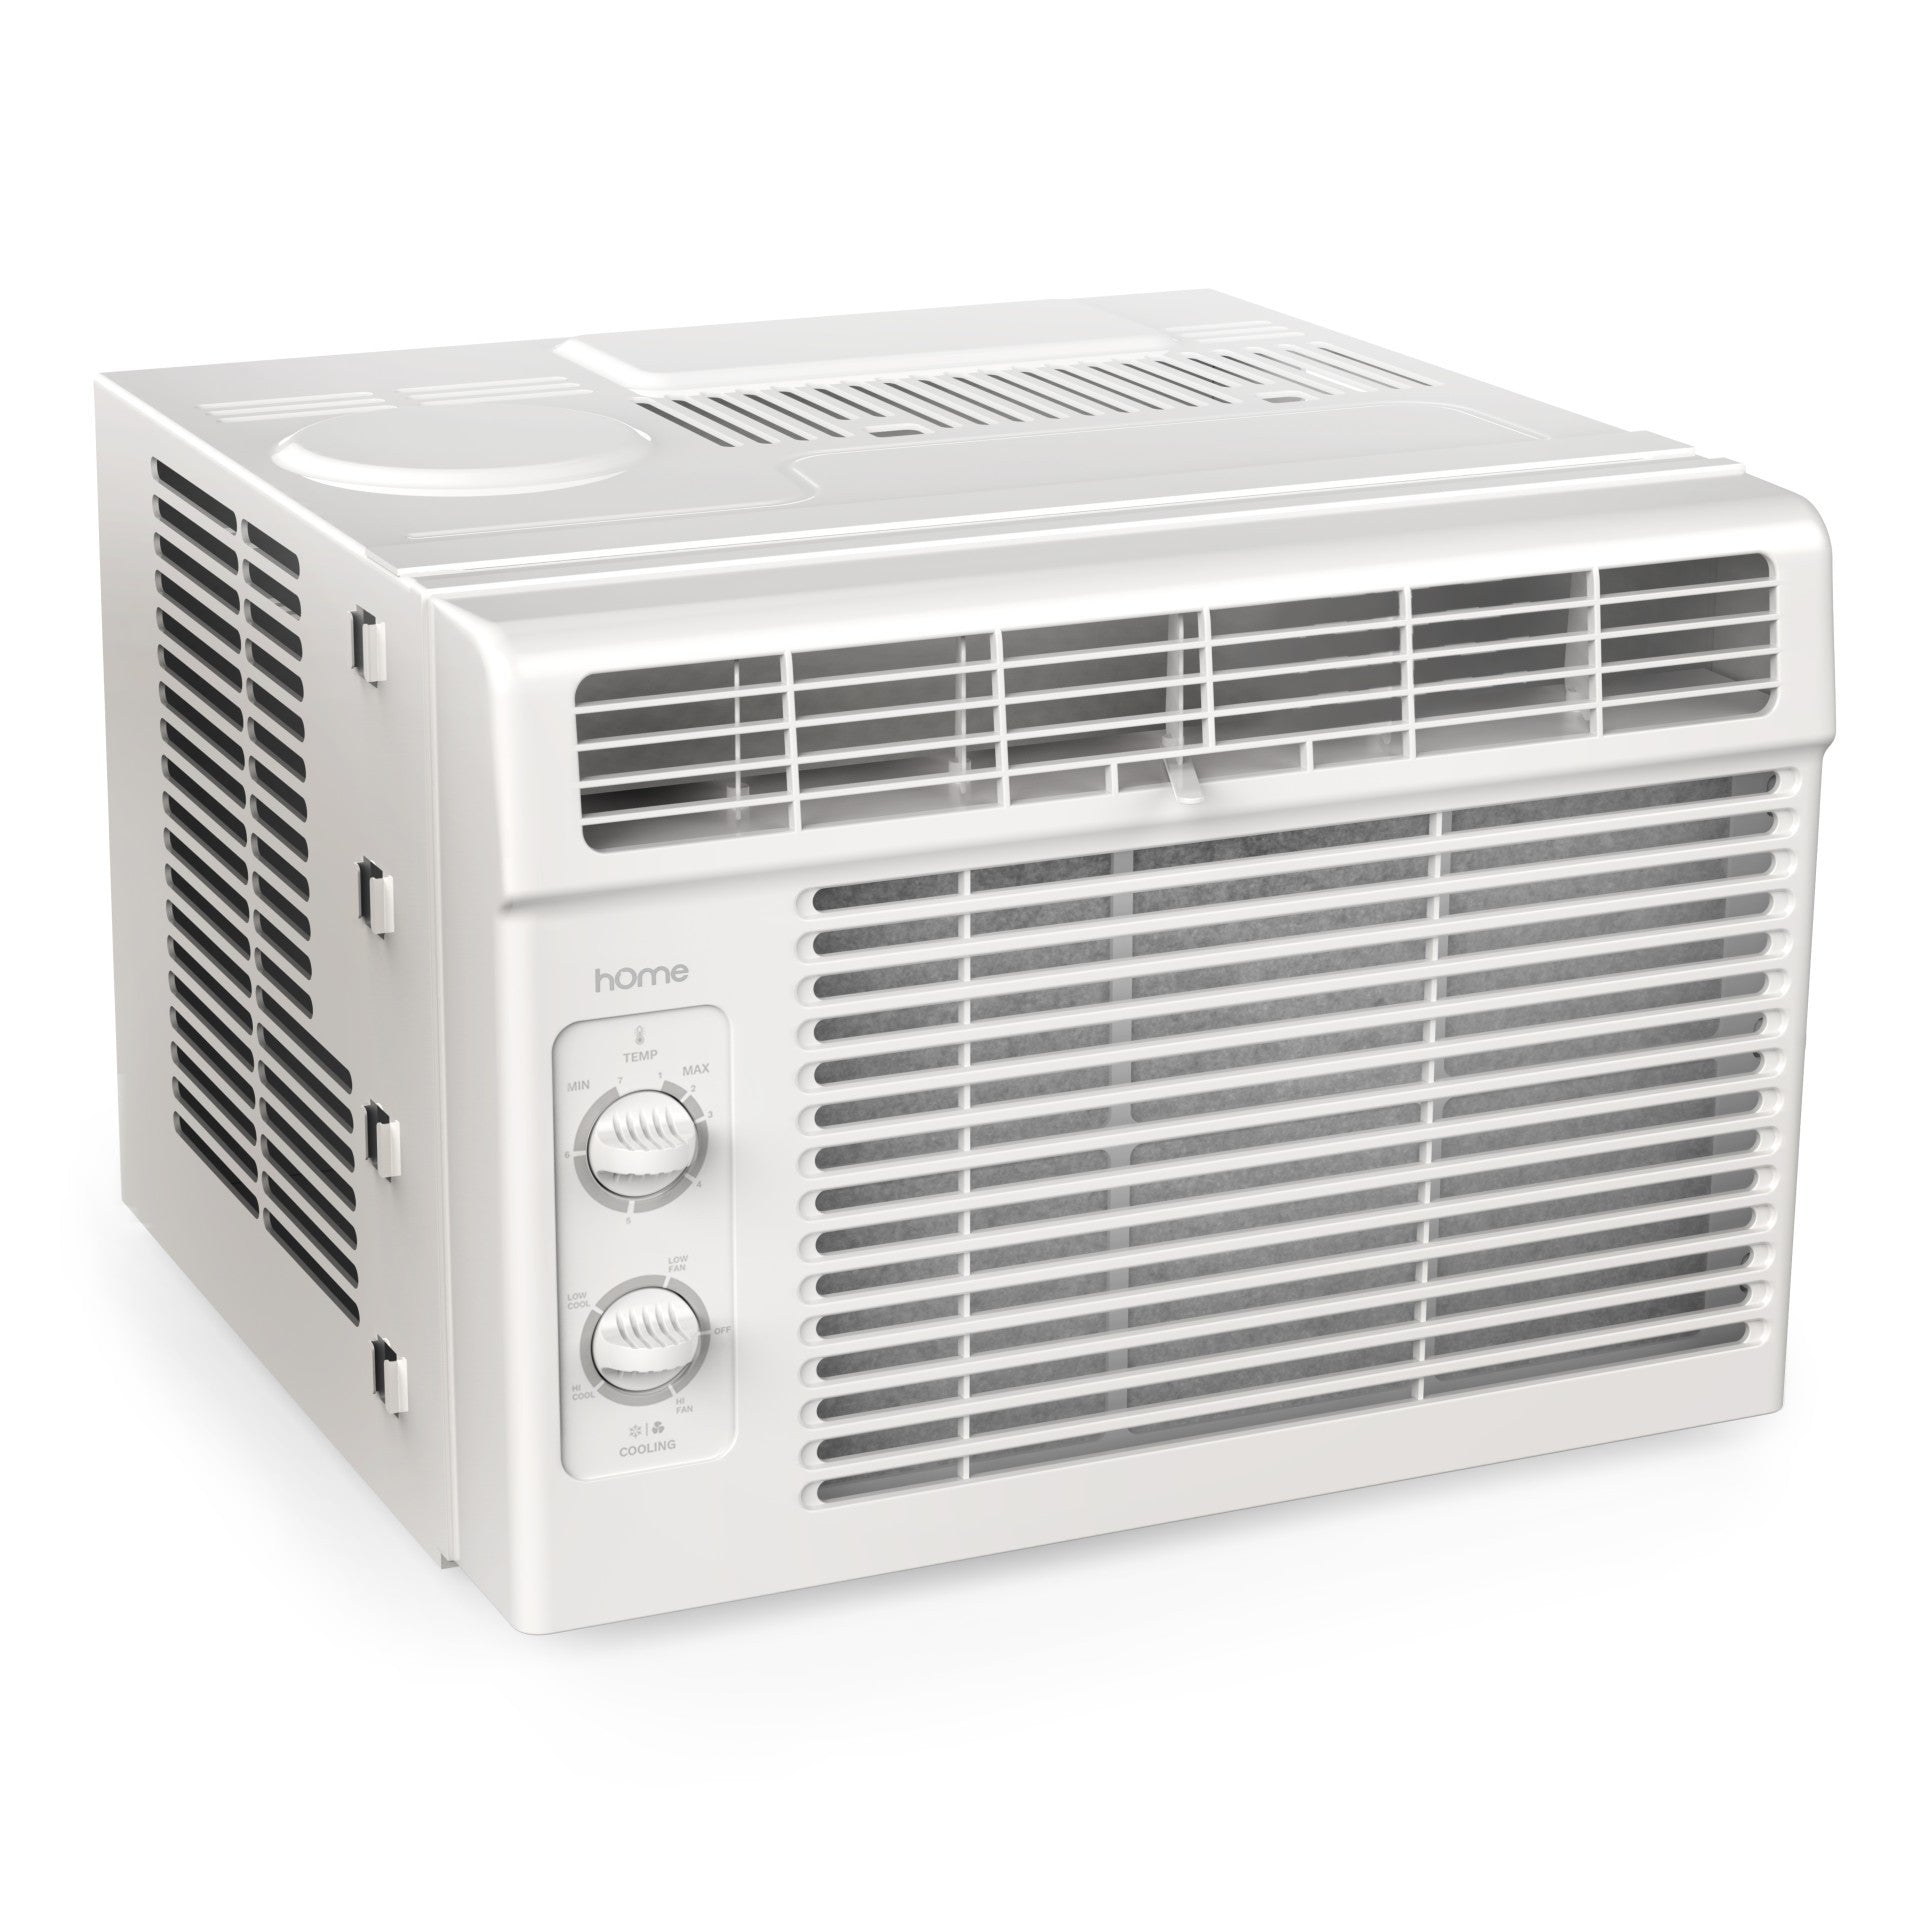 Window air conditioner with full view